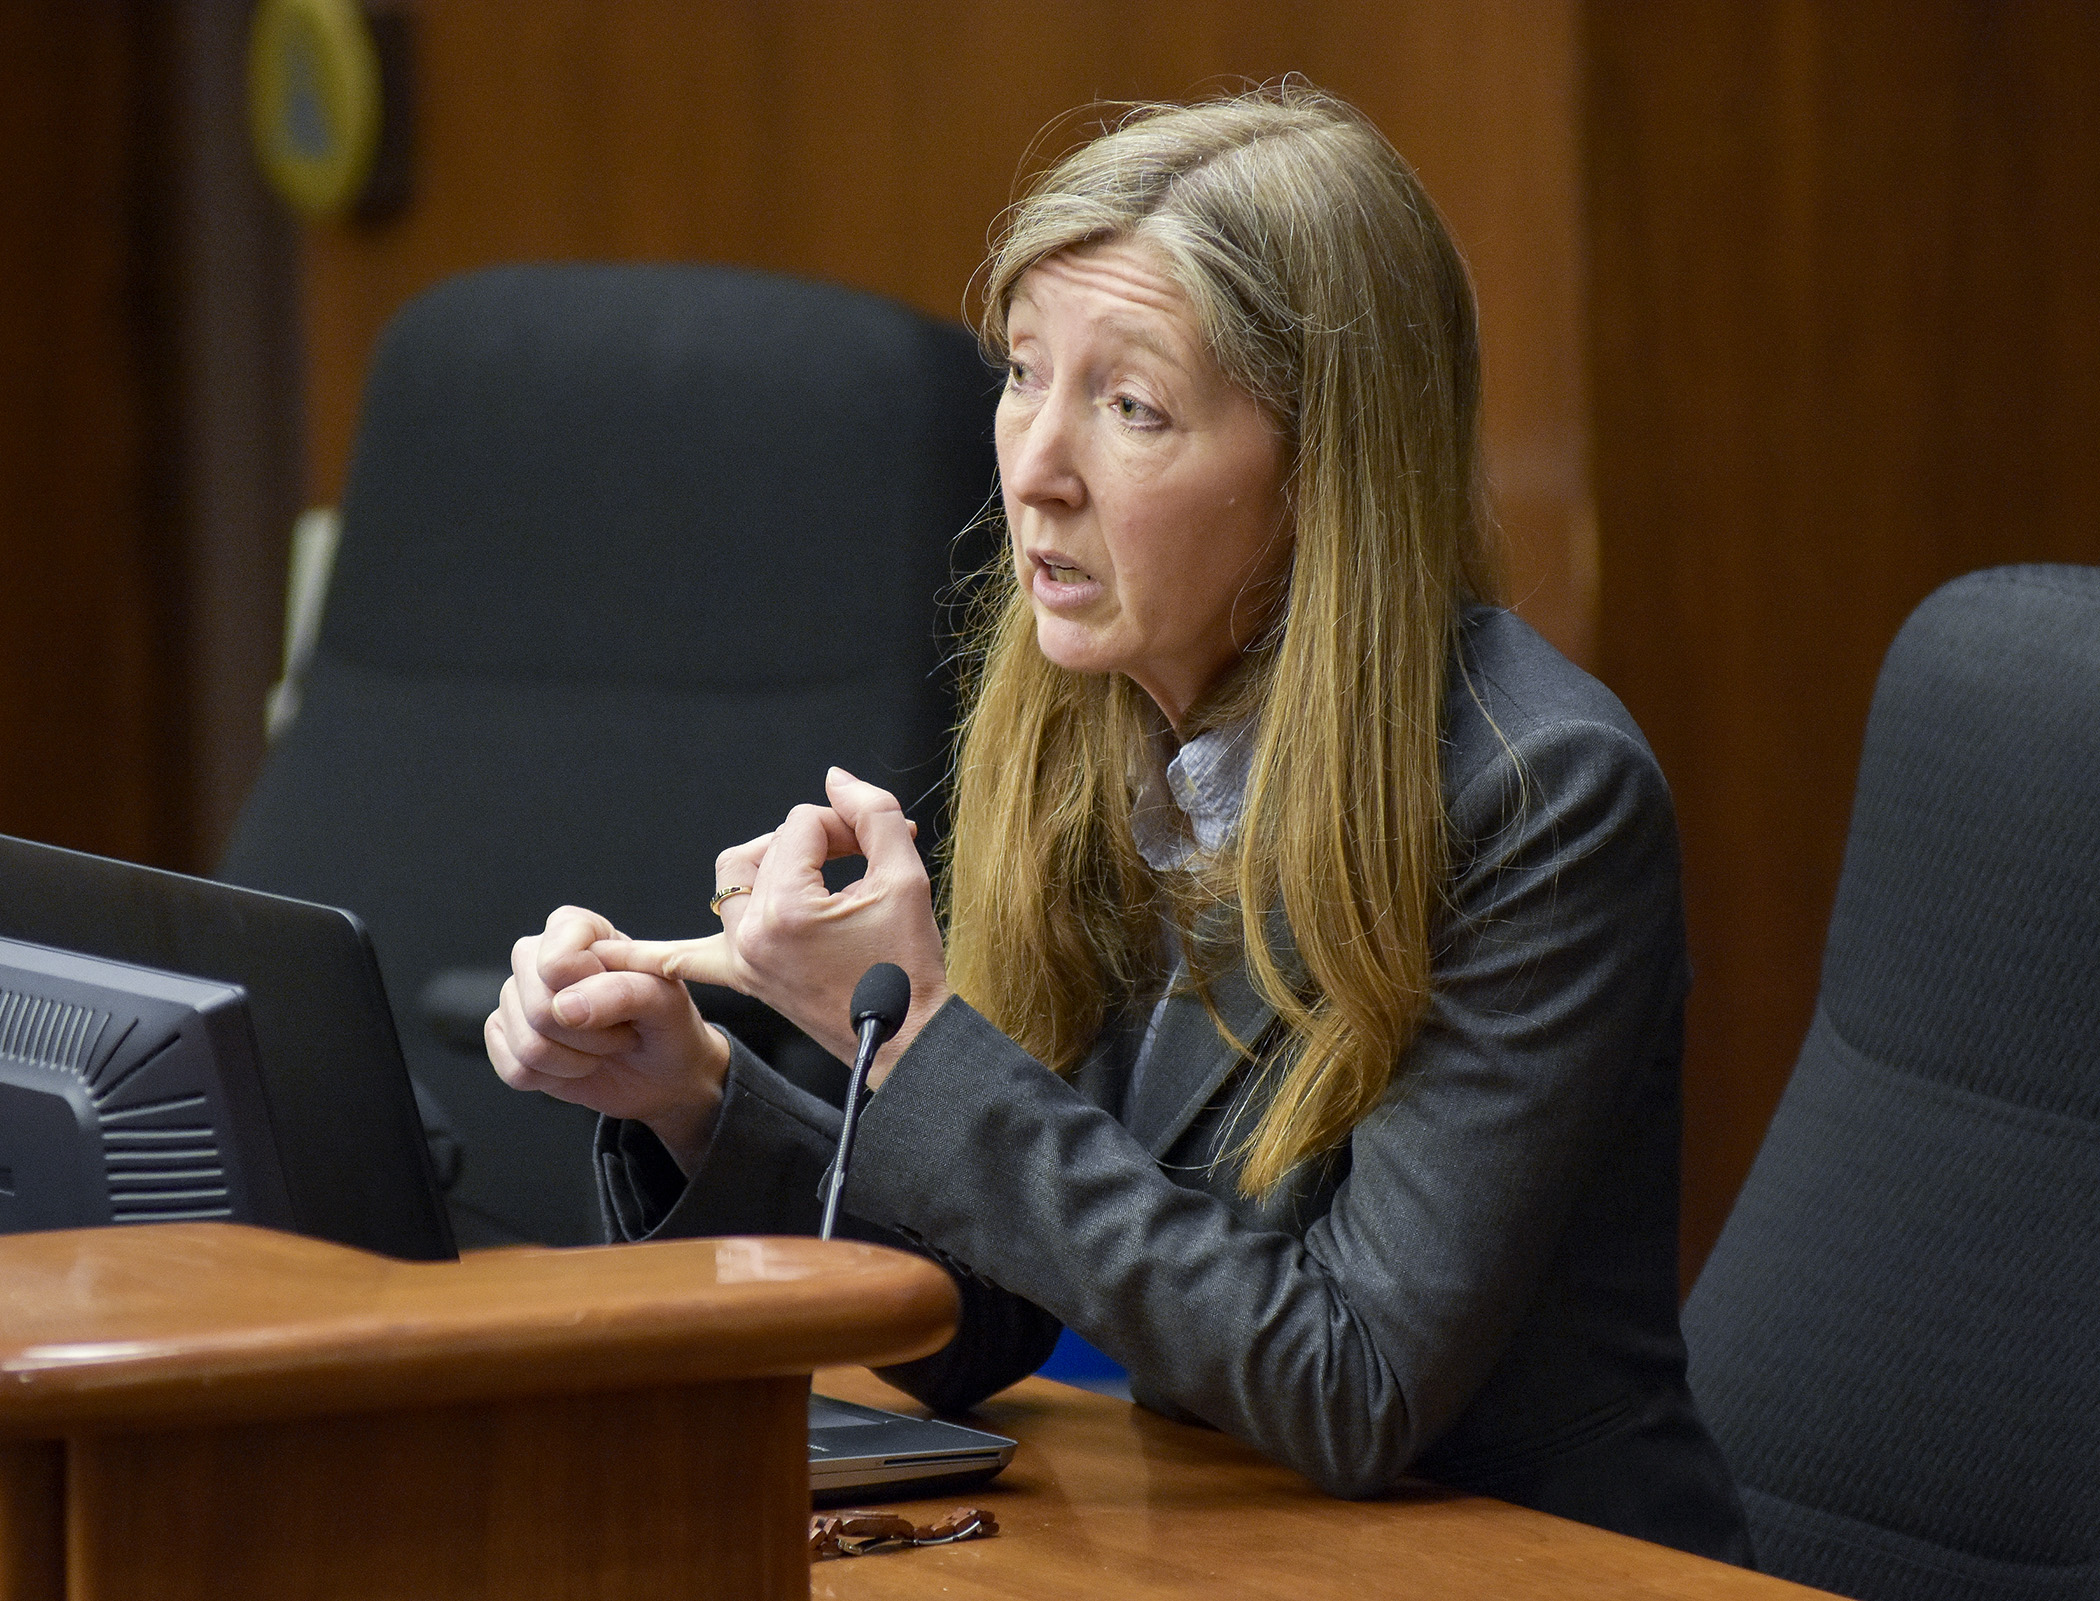 Julie Sorenson, director of the Northeast Center for Occupational Health and Safety, makes a presentation on tractor safety to the House Agriculture Policy Committee March 23. Photo by Andrew VonBank